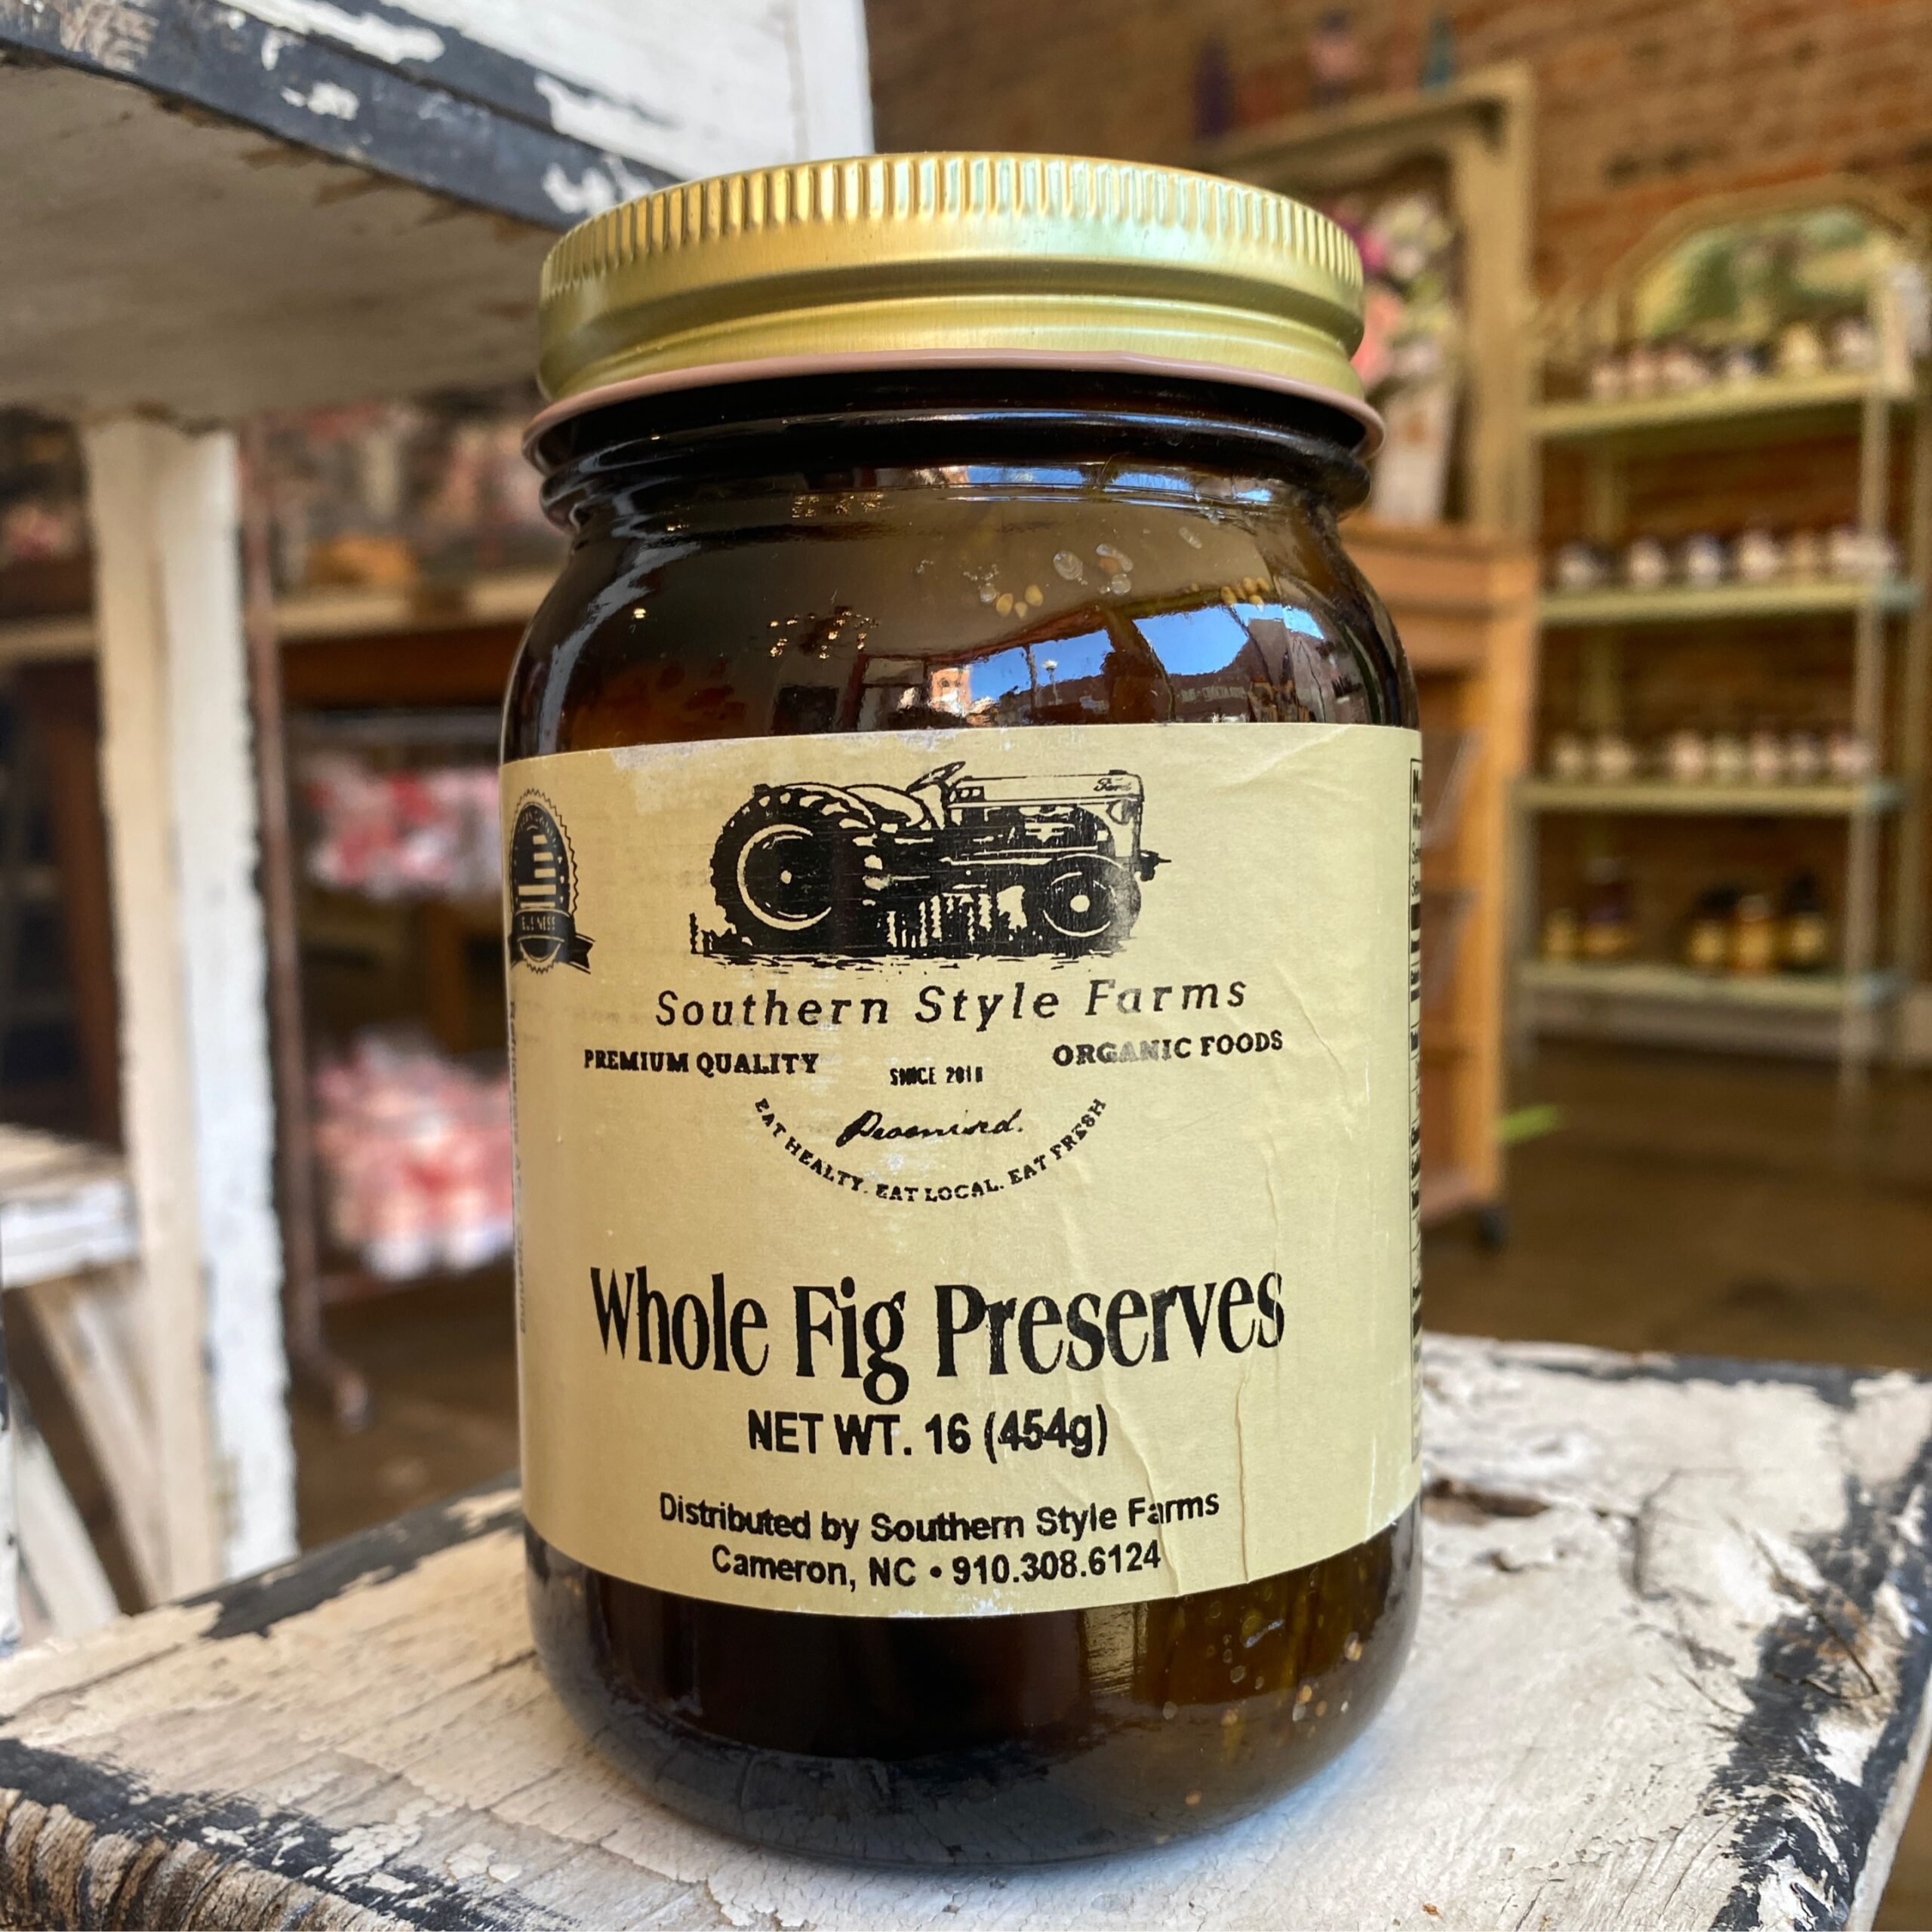 Southern Style Farms Whole Fig Preserve